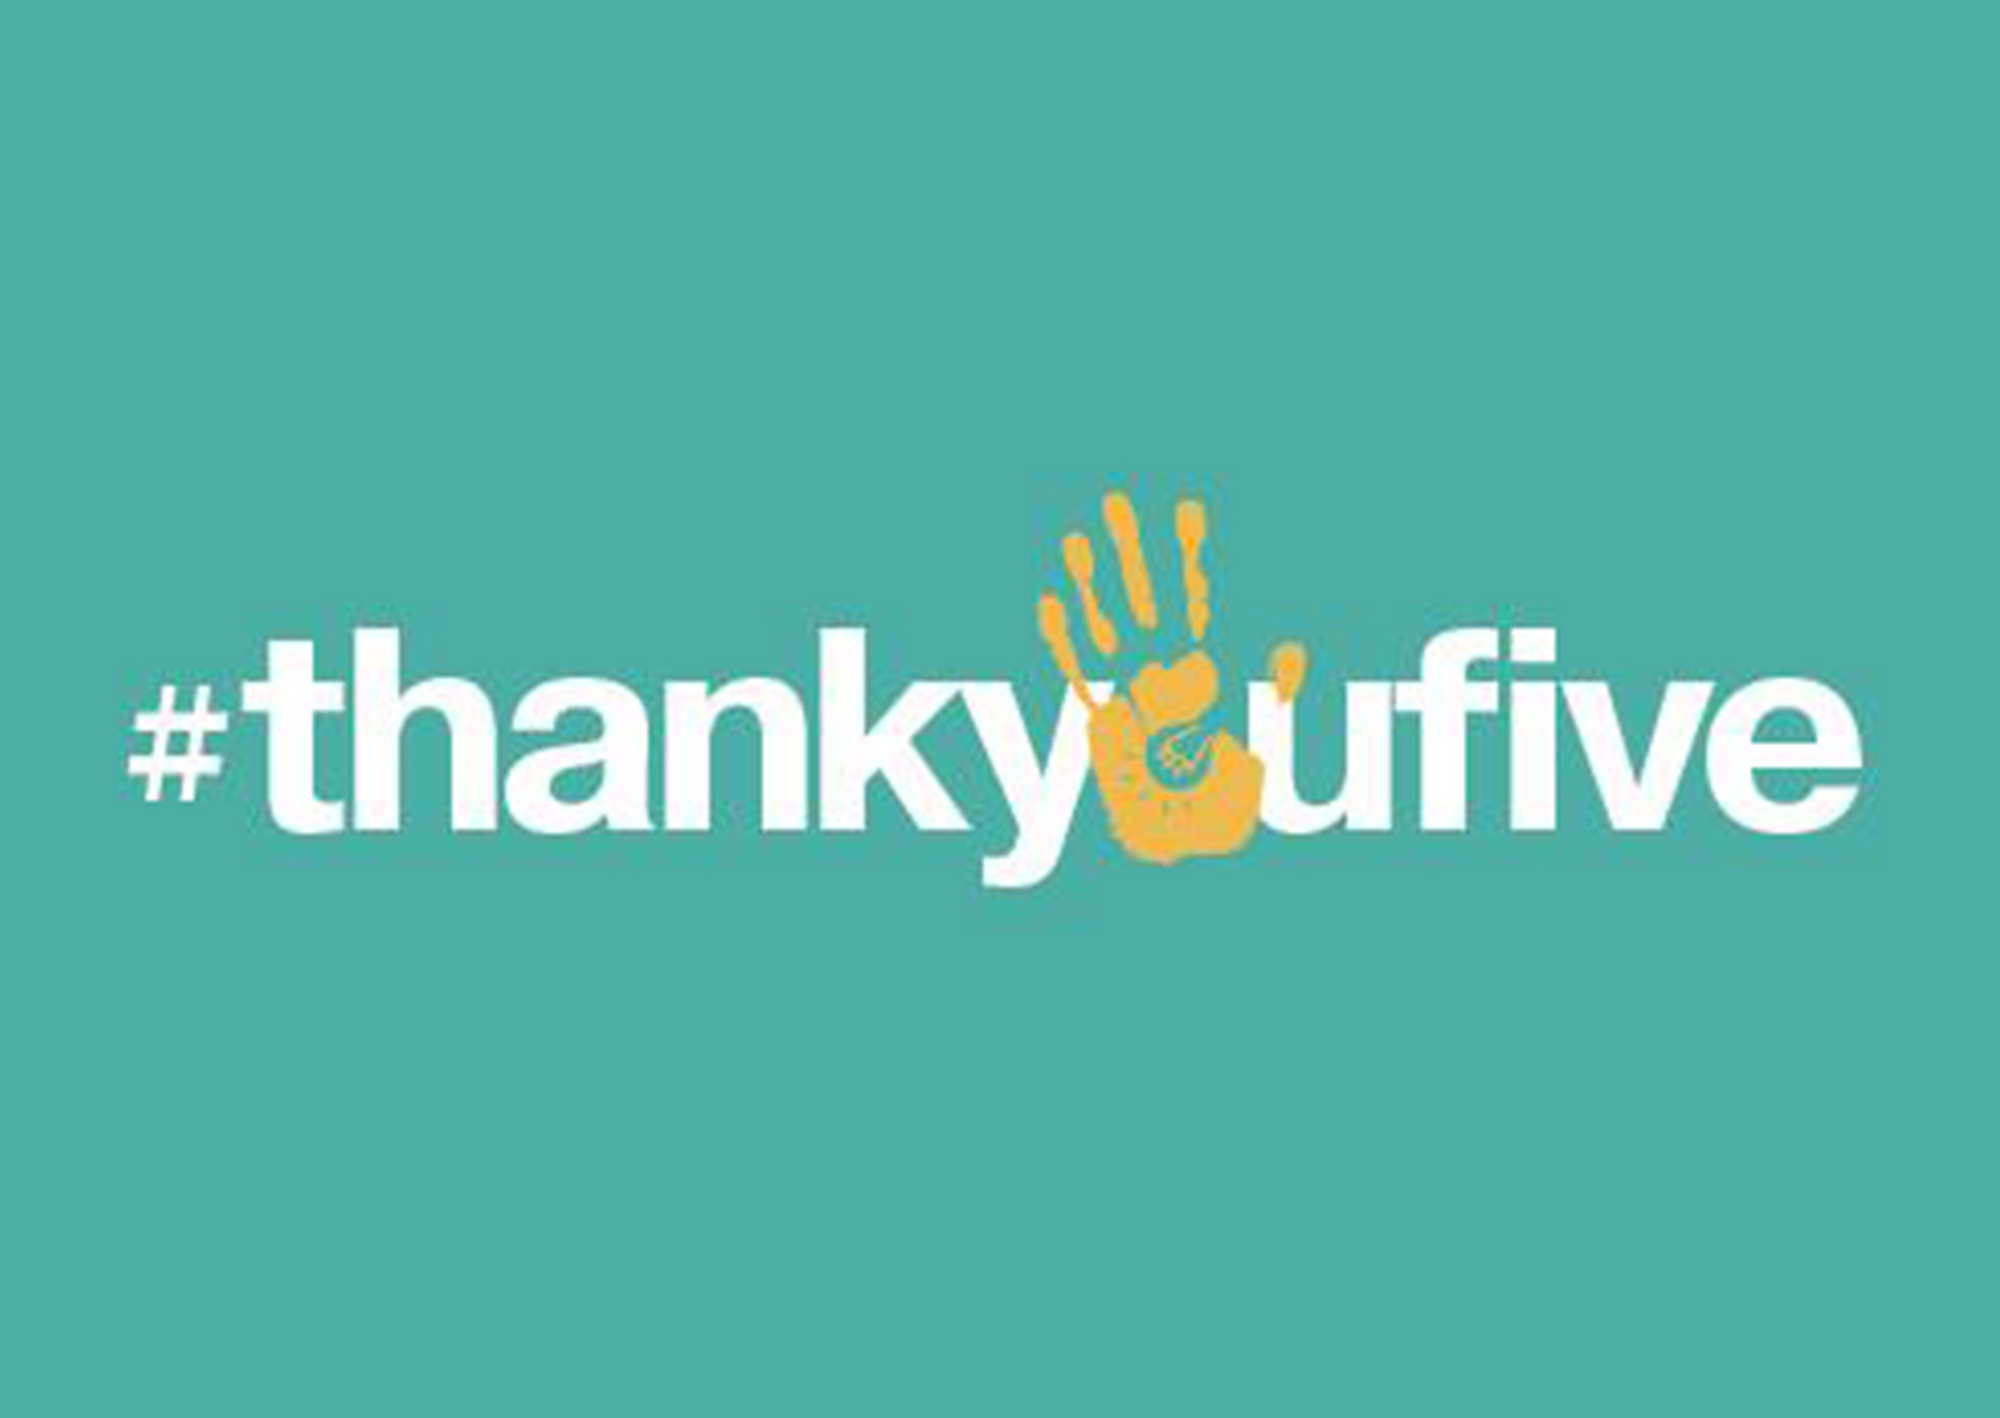 The Cre8sian Project Spotlight: Update on #thankyoufive